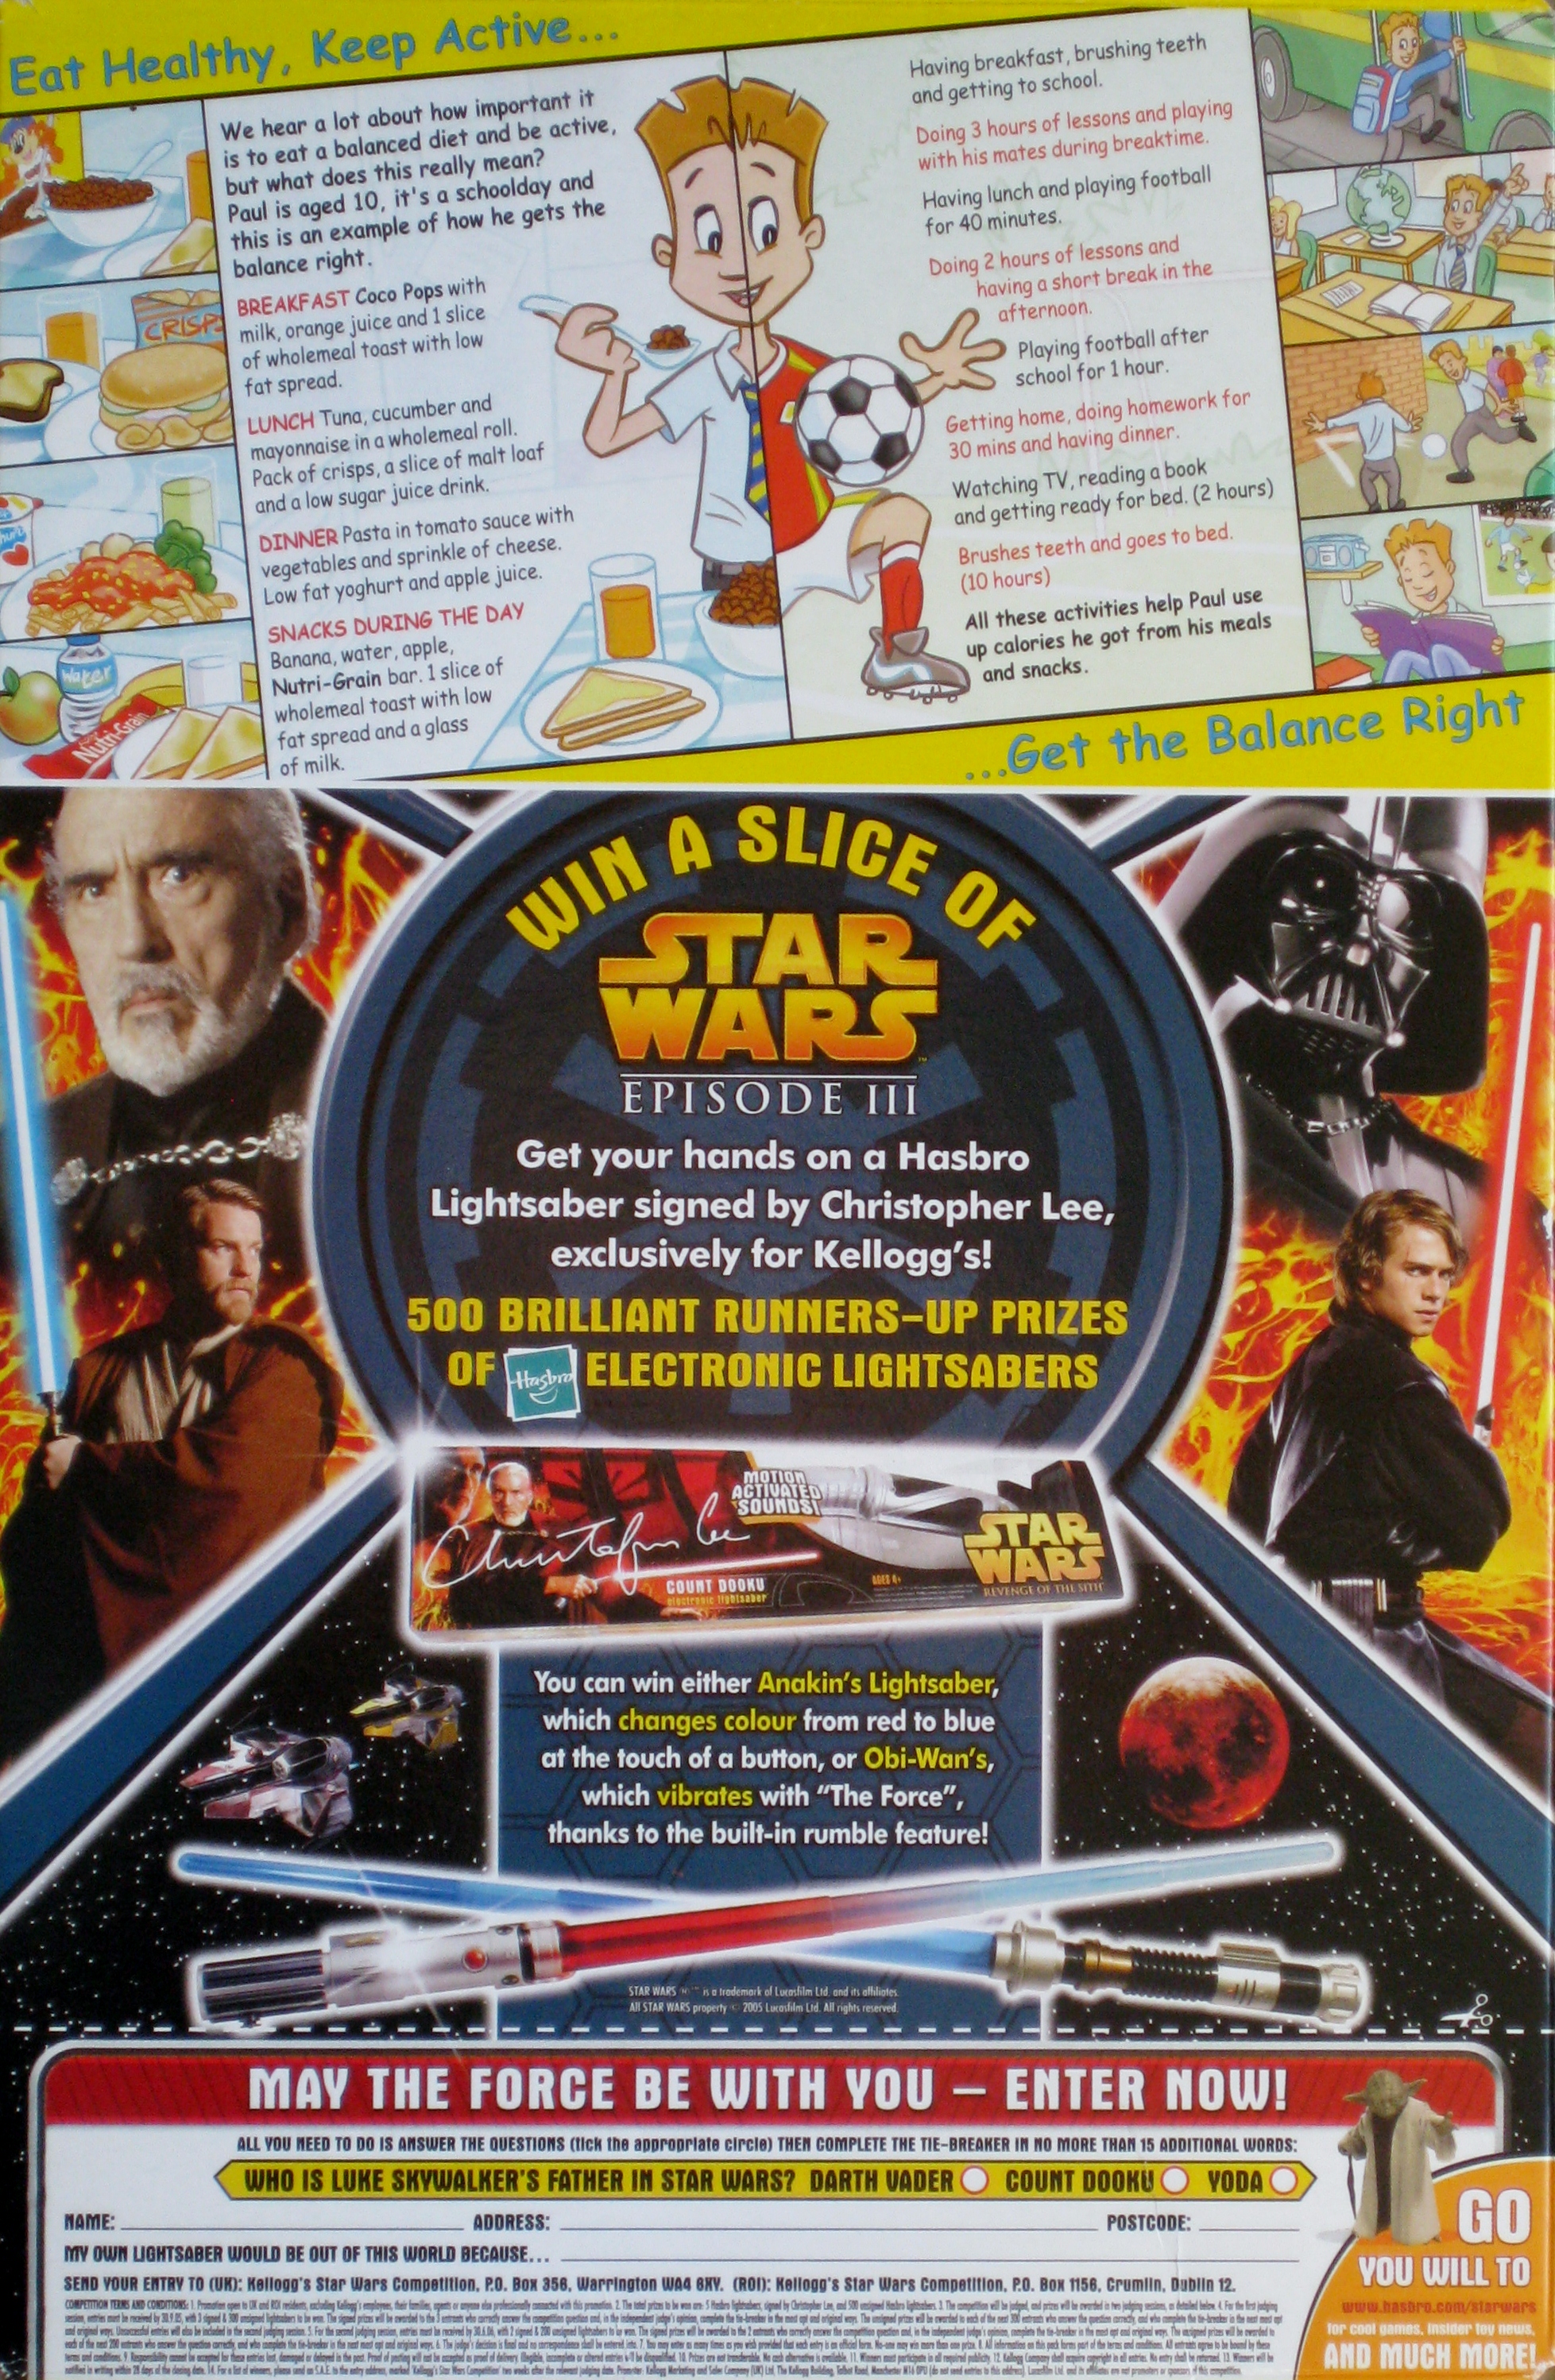 2005 Coco Pops Star Wars 3 competition